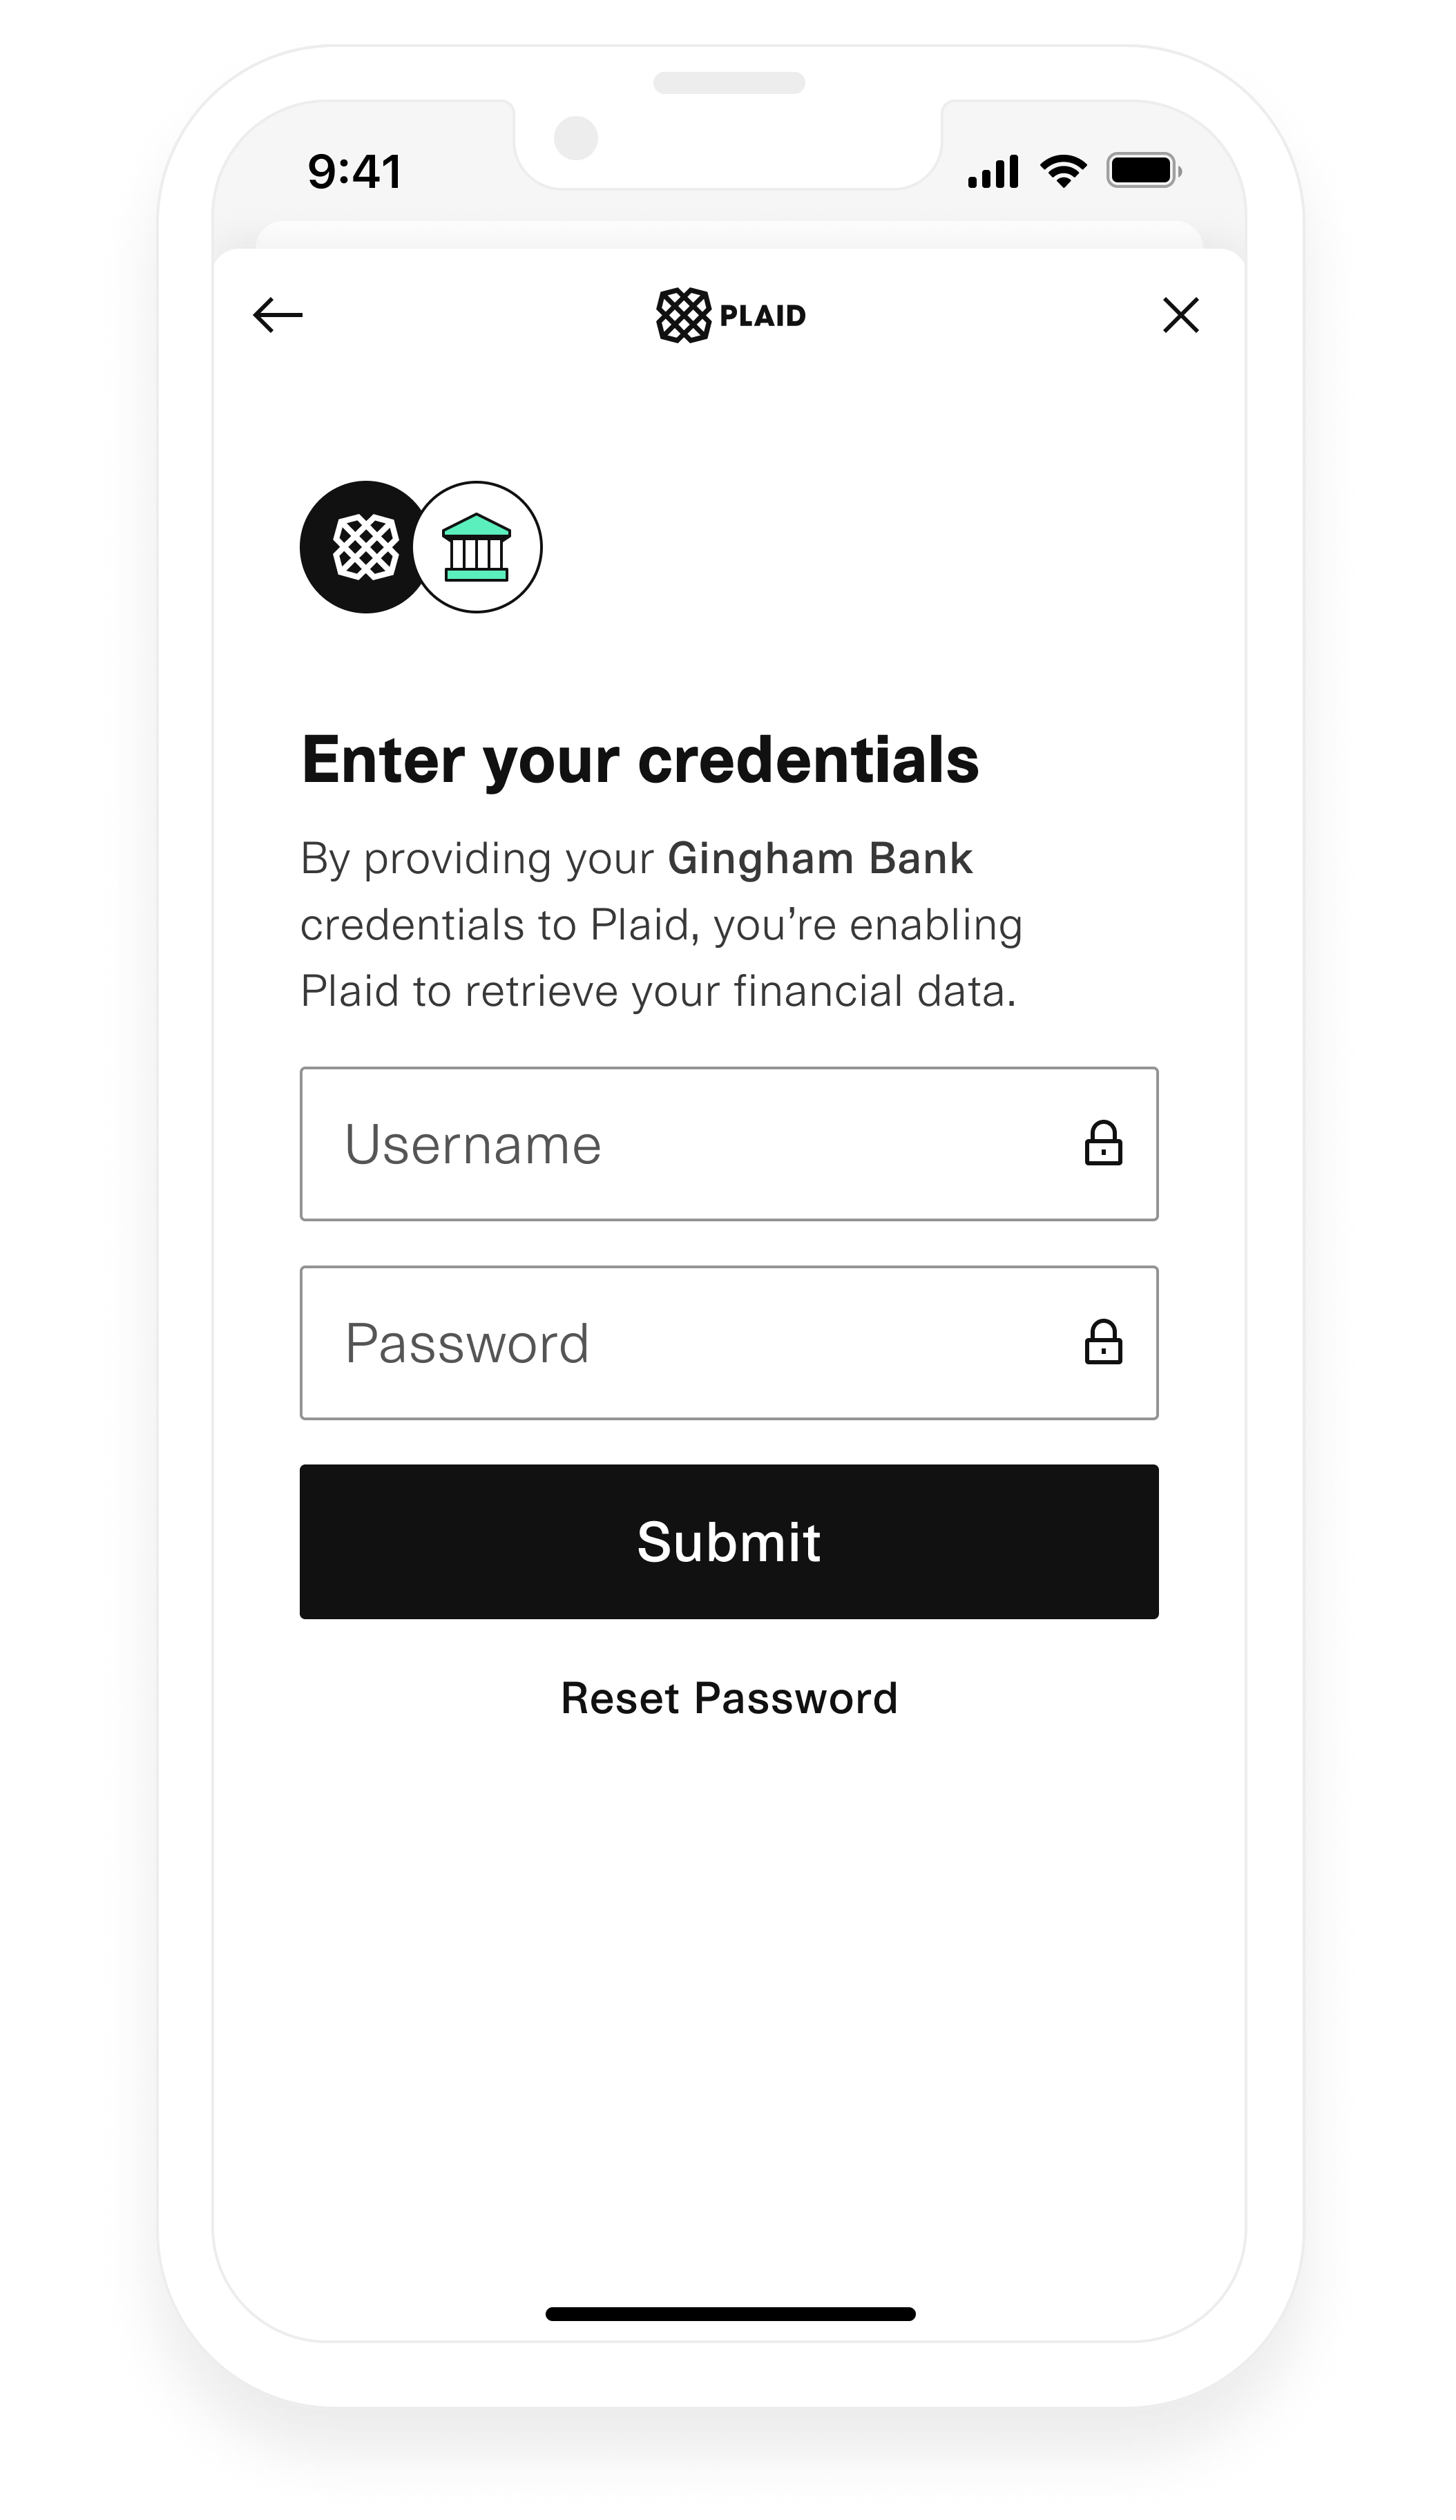 Users simply enter the login credentials associated with their accounts at the prompt.